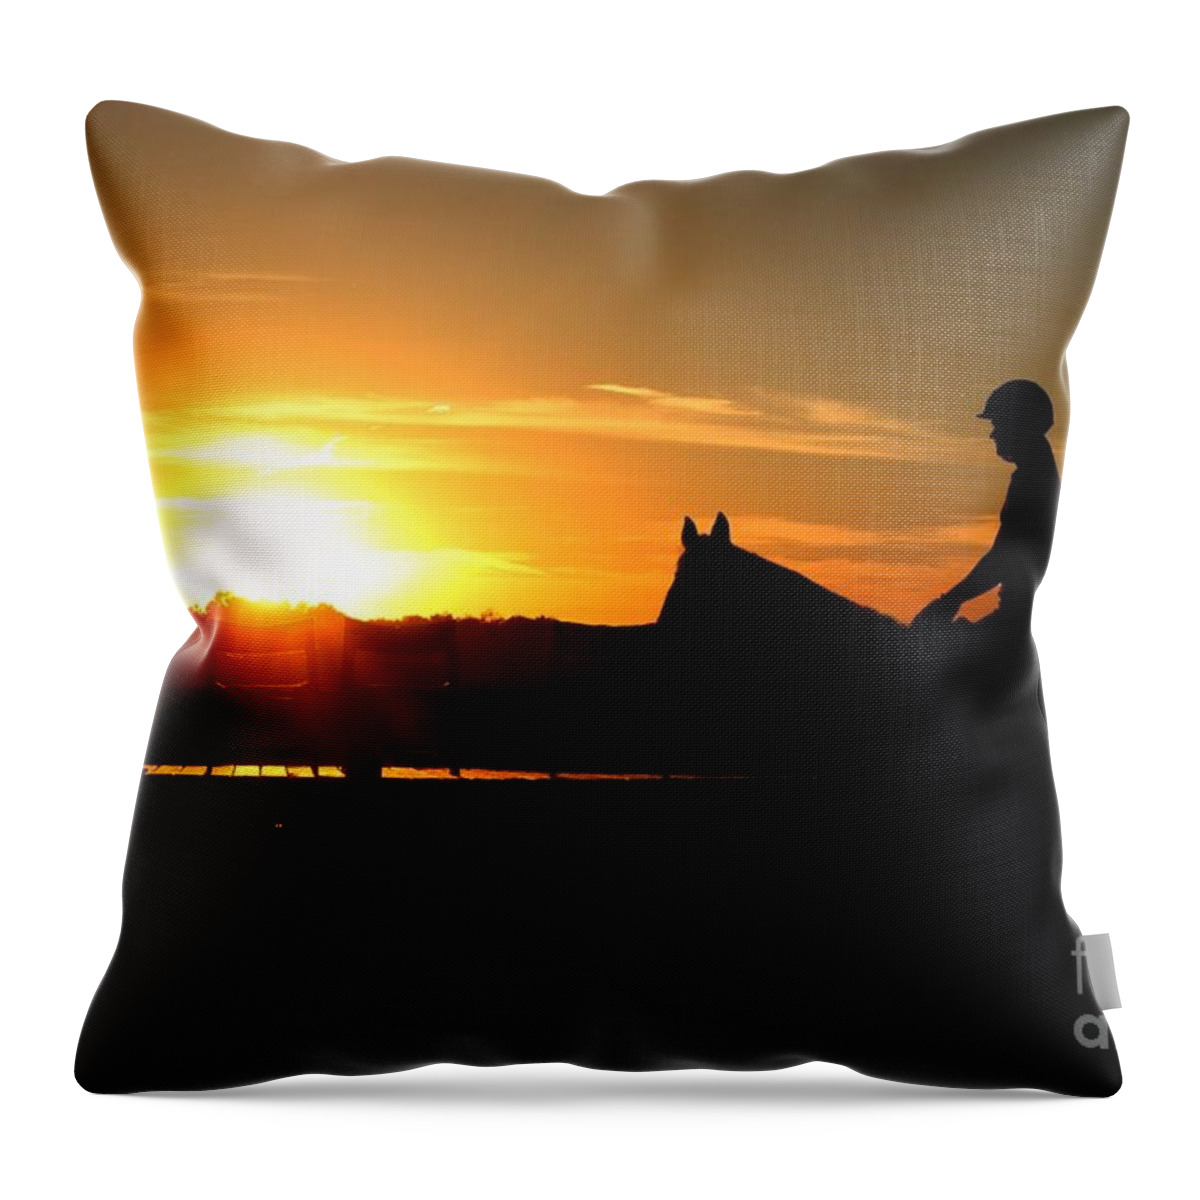 Horse Throw Pillow featuring the photograph Riding At Sunset by Janice Byer